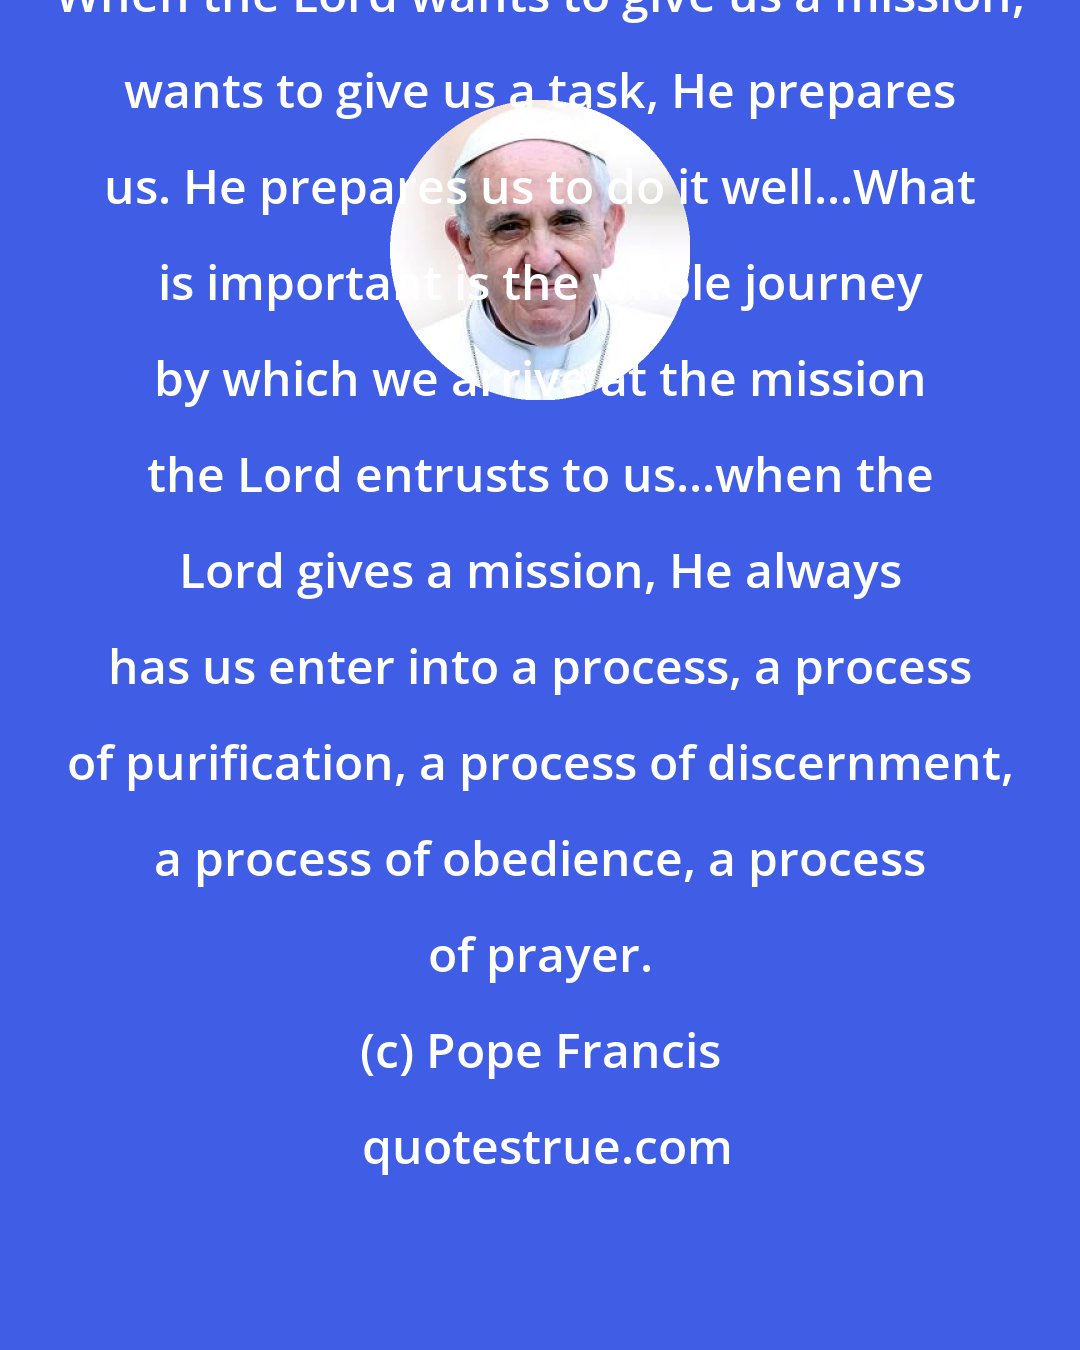 Pope Francis: When the Lord wants to give us a mission, wants to give us a task, He prepares us. He prepares us to do it well...What is important is the whole journey by which we arrive at the mission the Lord entrusts to us...when the Lord gives a mission, He always has us enter into a process, a process of purification, a process of discernment, a process of obedience, a process of prayer.